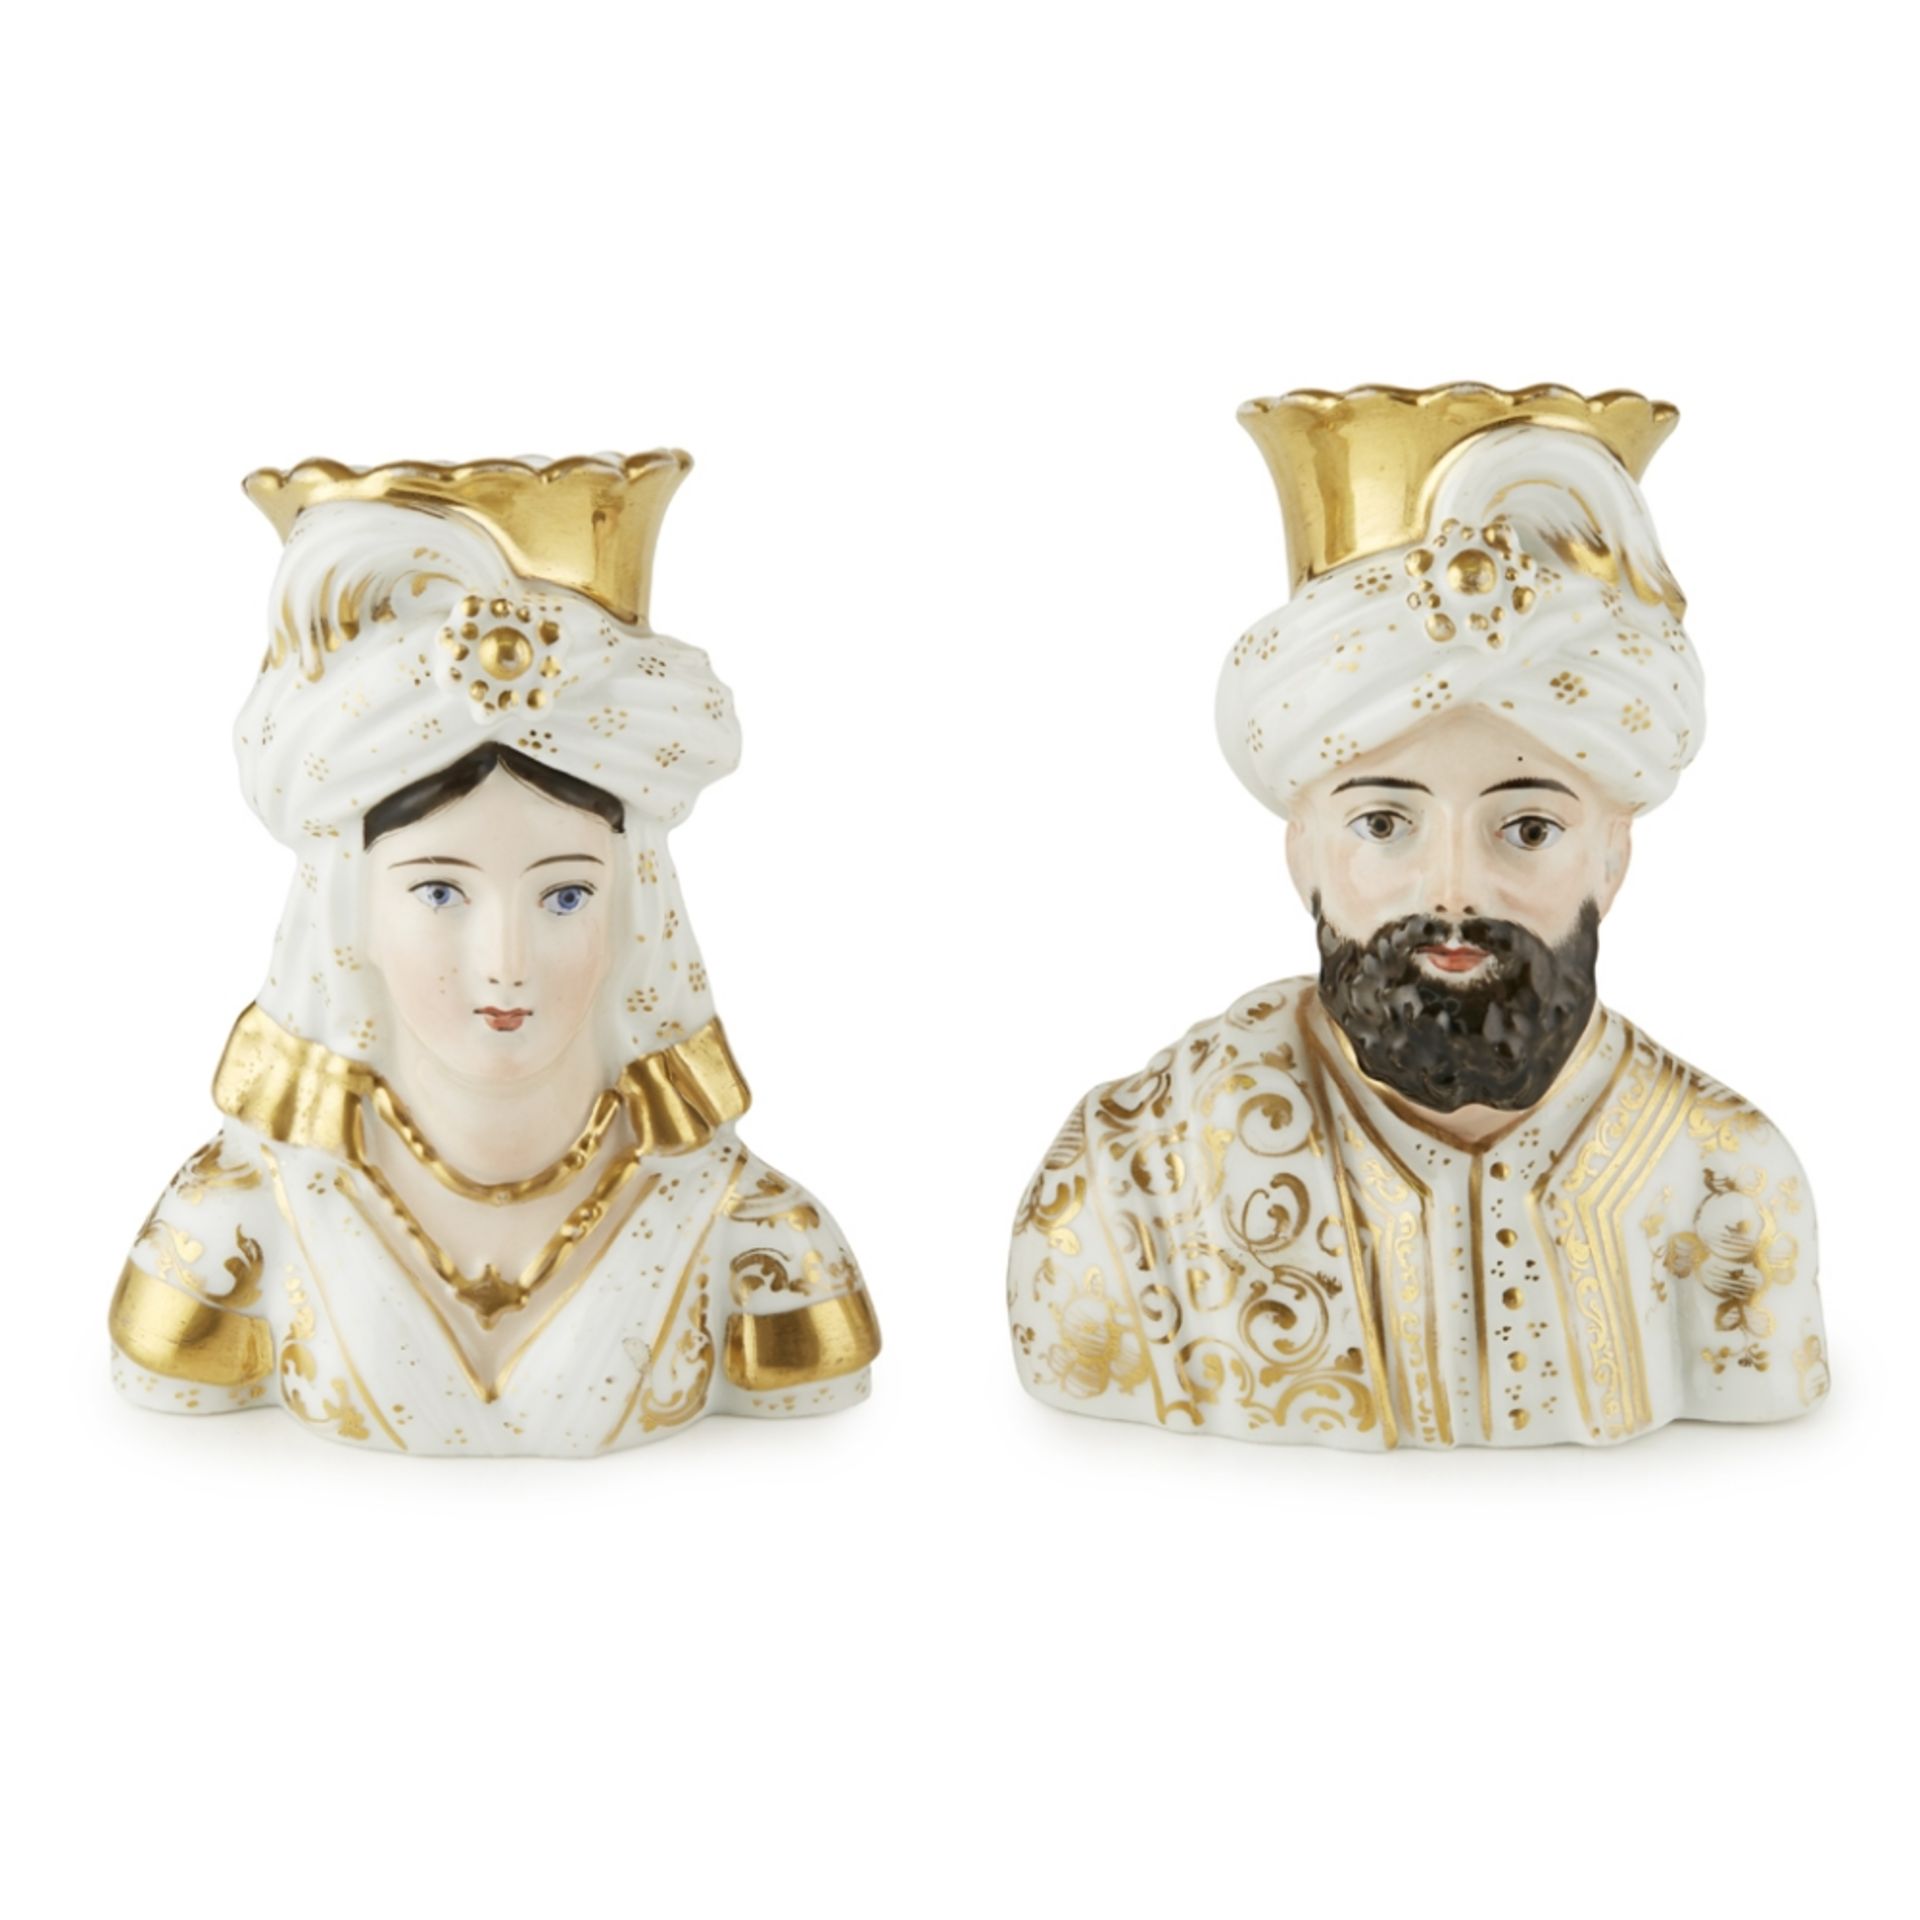 PAIR OF PORCELAINE DE PARIS BUSTS OF OTTOMANS19TH CENTURY modelled as a sultan and sultana, their